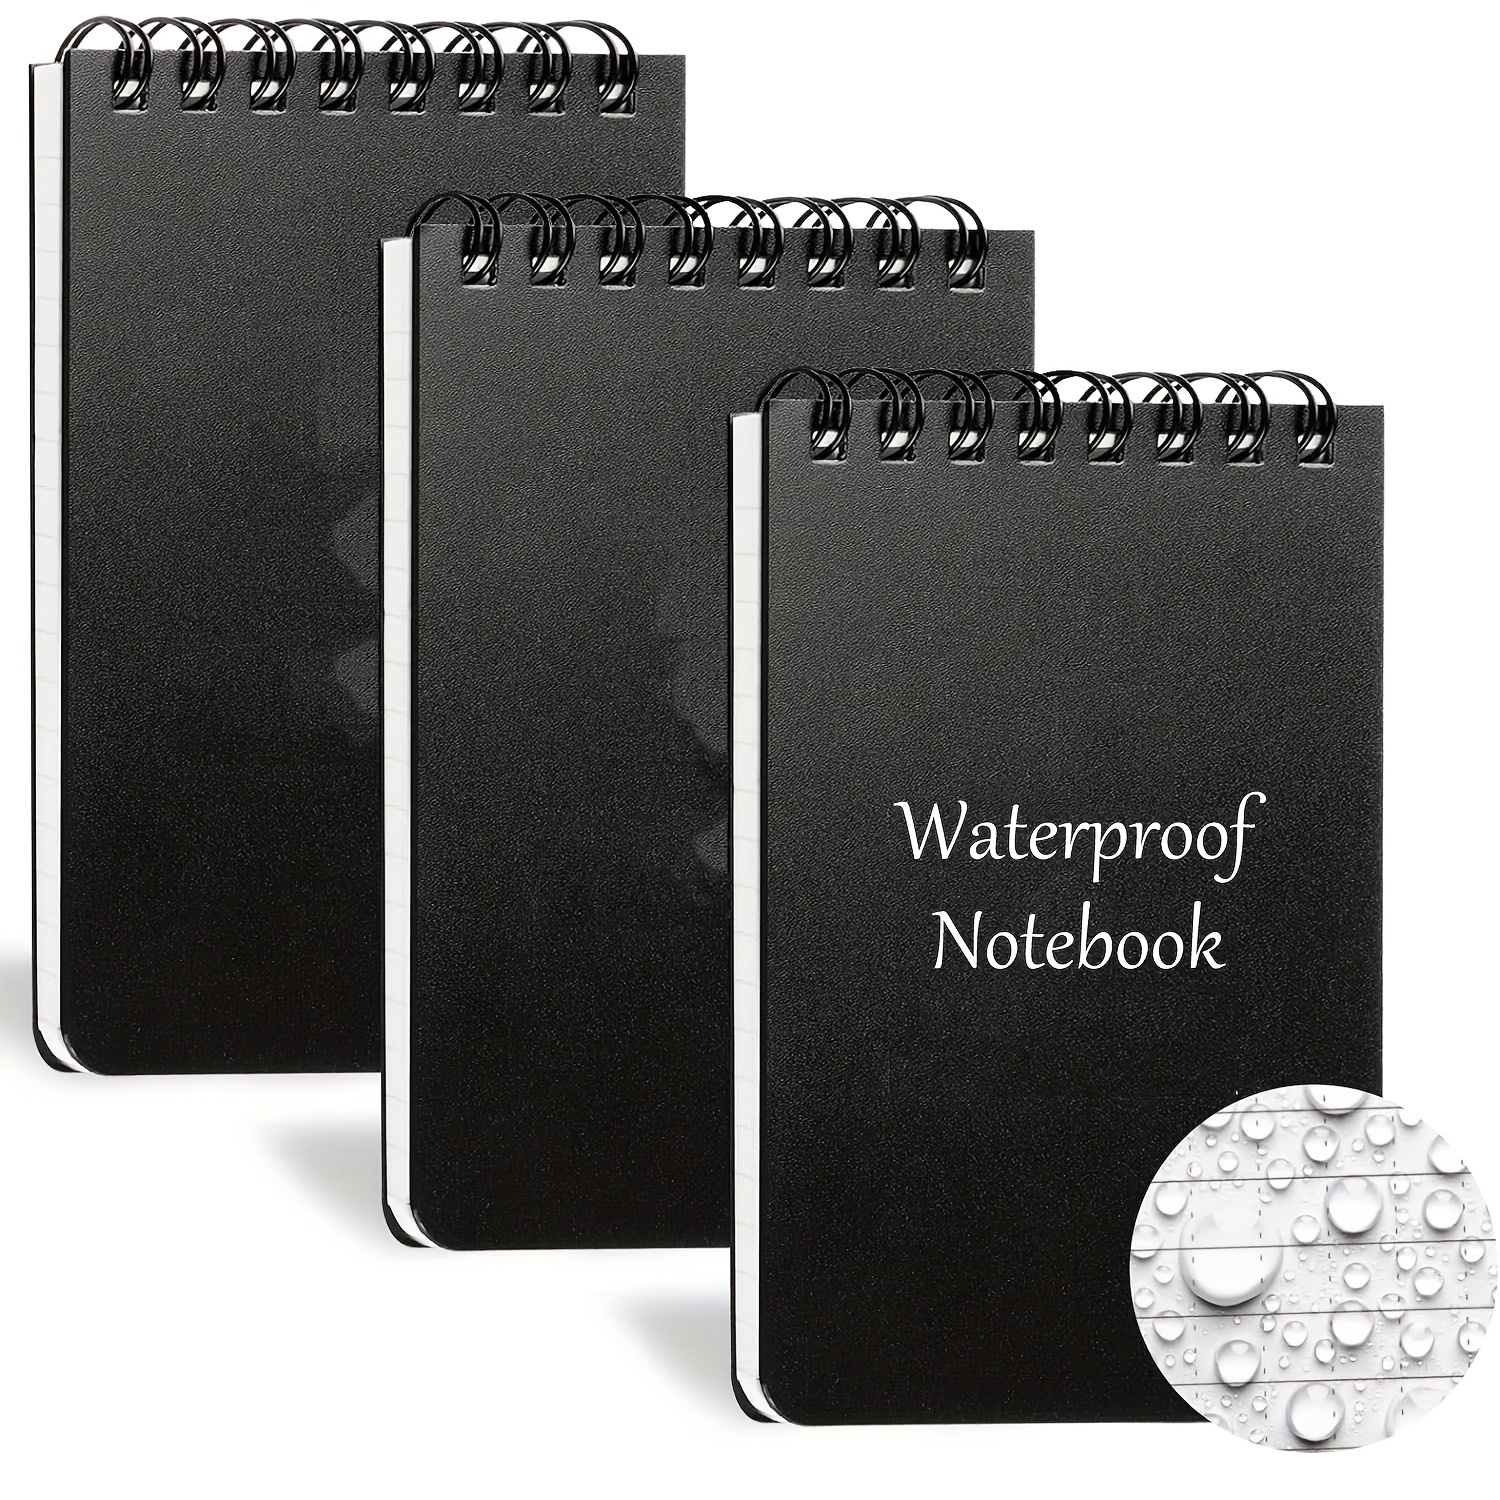 

3pcs Waterproof Notebook Notepad Black Cover Pocket Notebook 150 Sheets Grid Paper Weatherproof Spiral Memo Paper Notepad For Outdoor Activities Recording